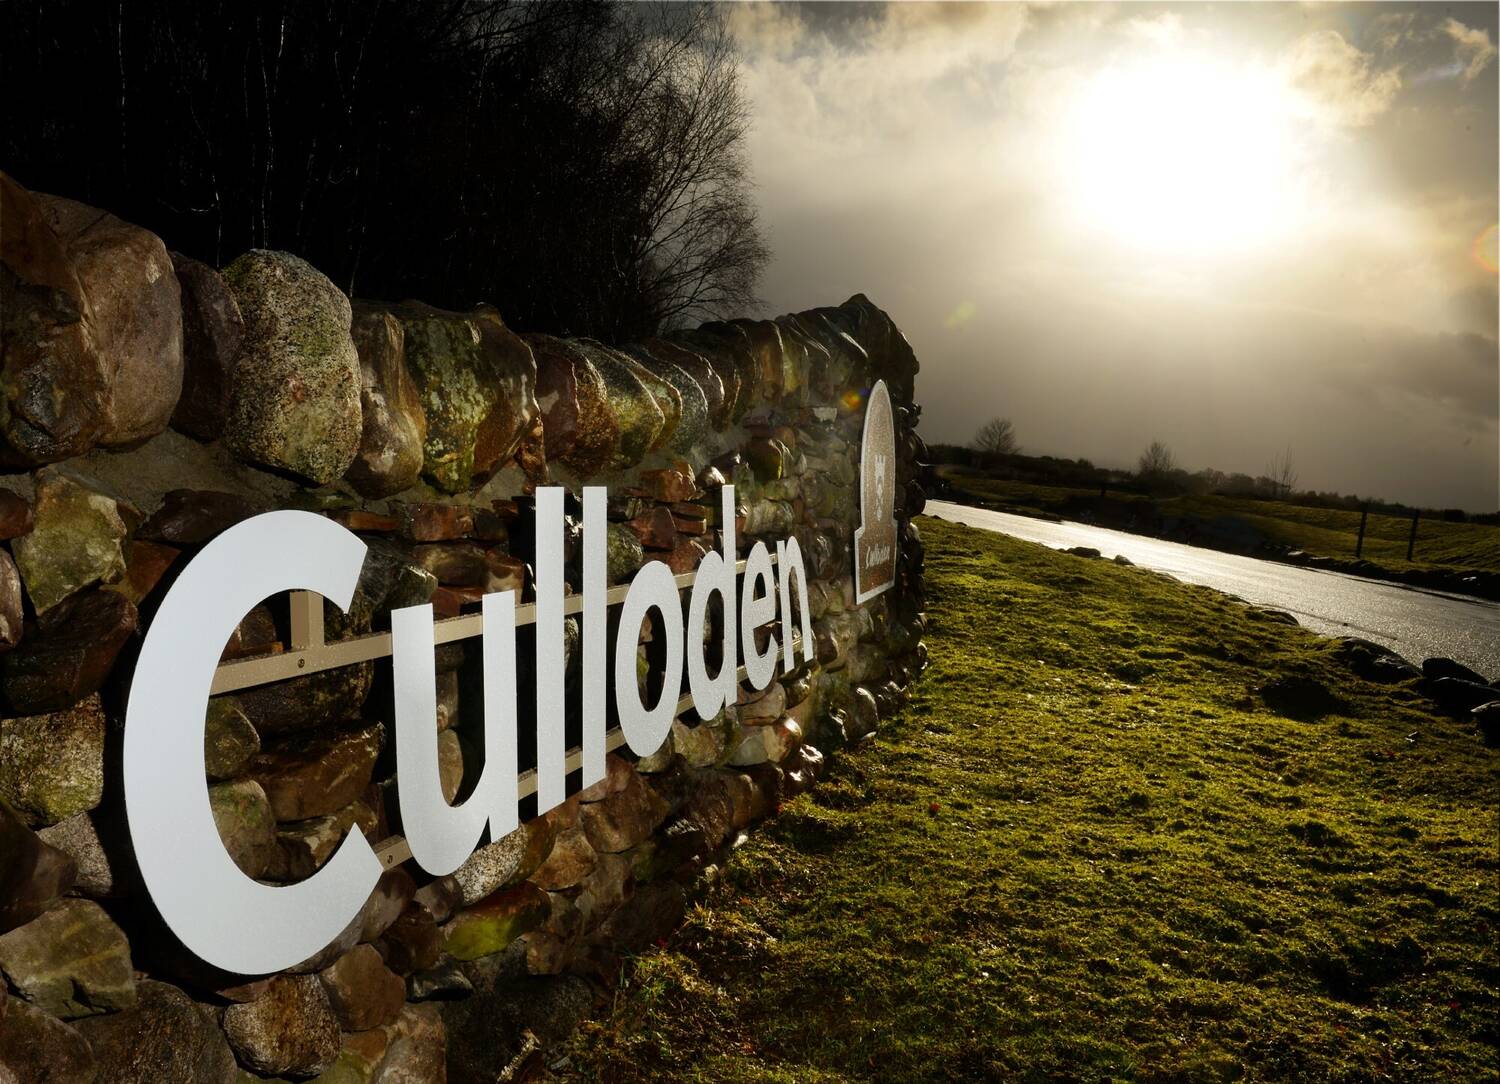 Metal letters spelling out Culloden are attached to an old stone wall at the entrance to a driveway. It has rained recently and the grass and stones glisten as the sun breaks through the clouds.